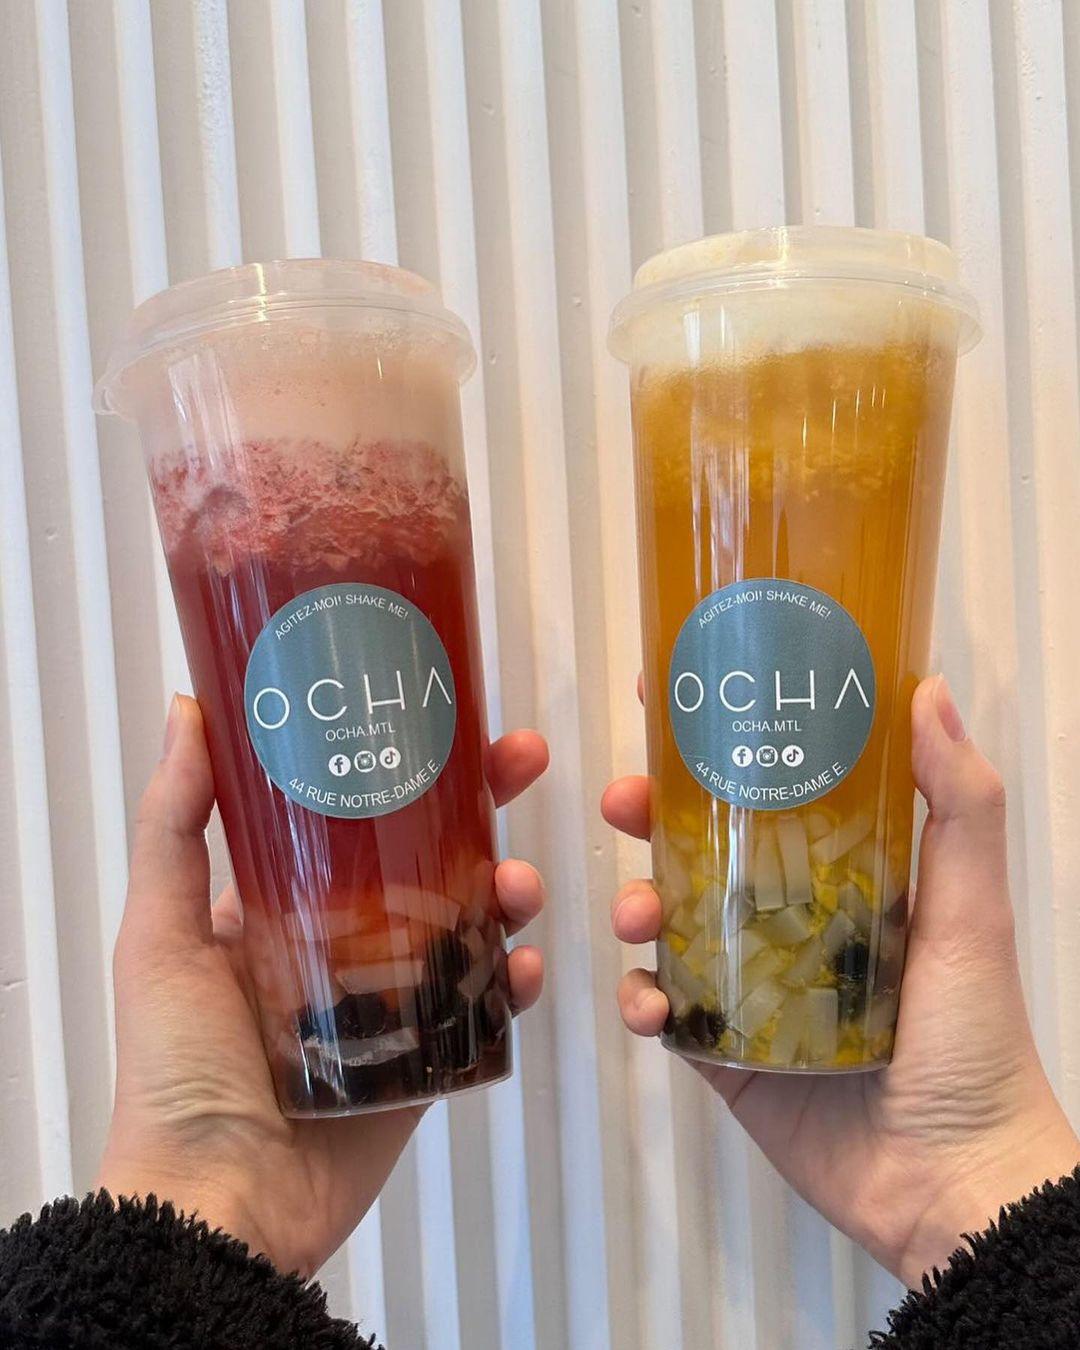 class="content__text"
 Sip into something sweet and refreshing with Ocha's Strawberry Oolong Tea and Pineapple Oolong Tea! Buy 2, get 1 FREE! Because life's too short for just one bubble tea. 😉 (@ochacanada) #TasteMontreal 
 